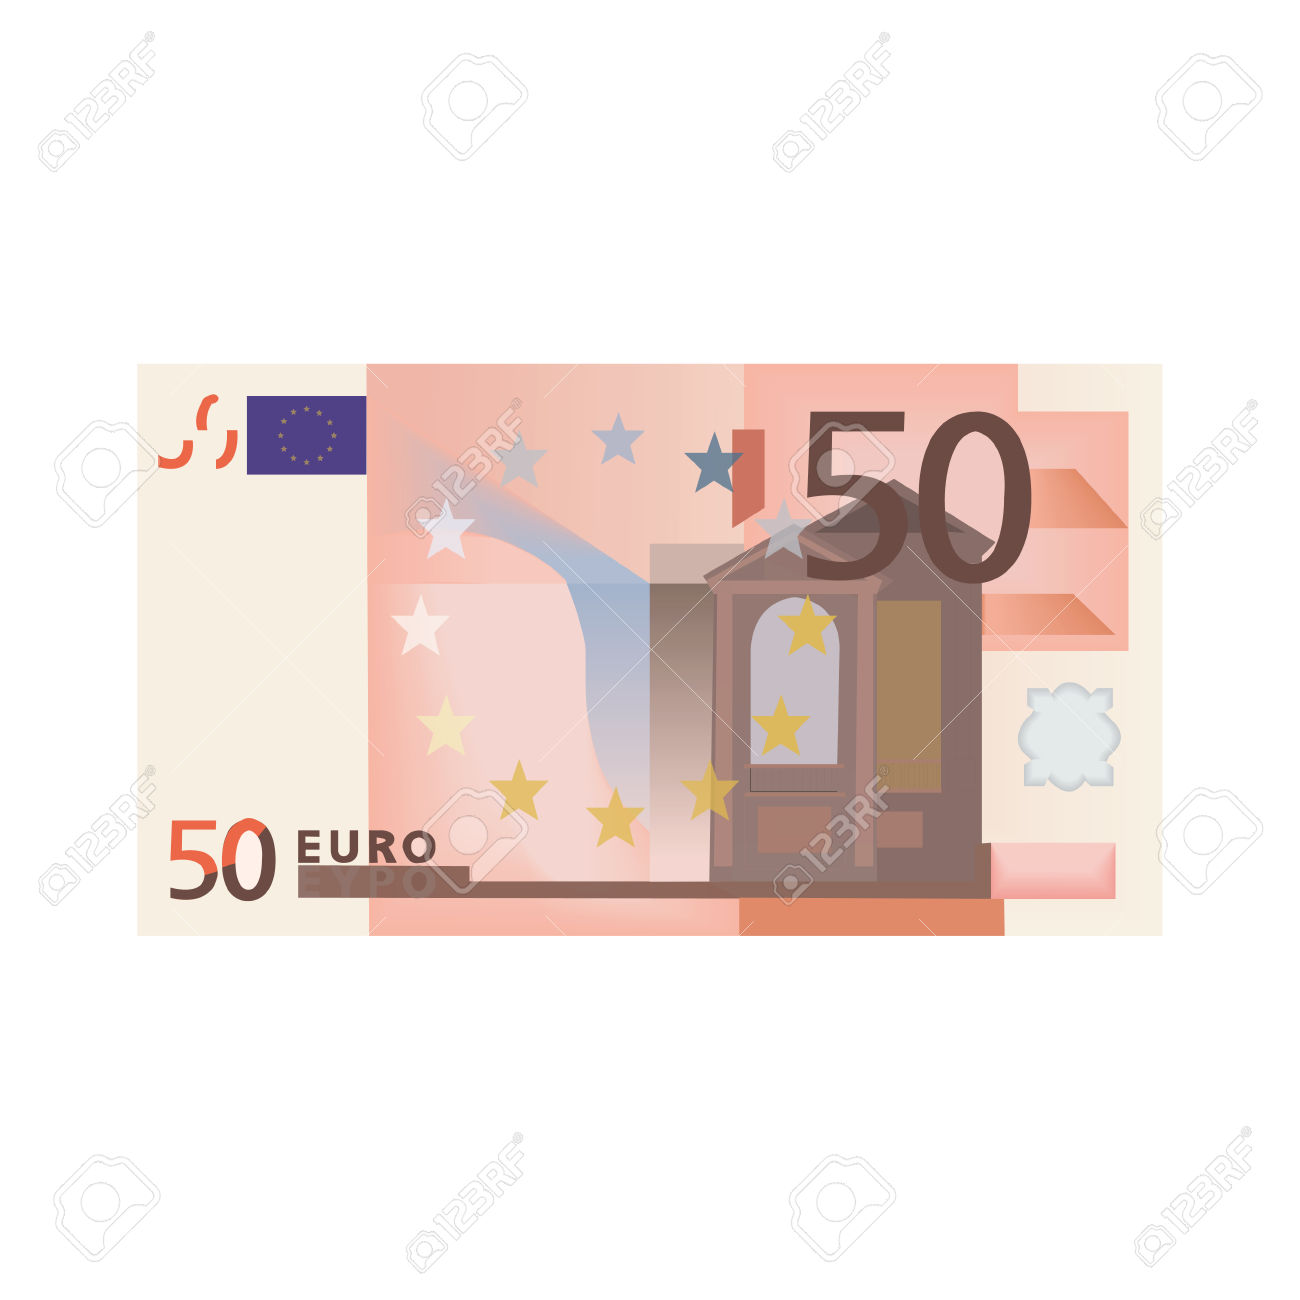 50 Euro Royalty Free Cliparts, Vectors, And Stock Illustration.